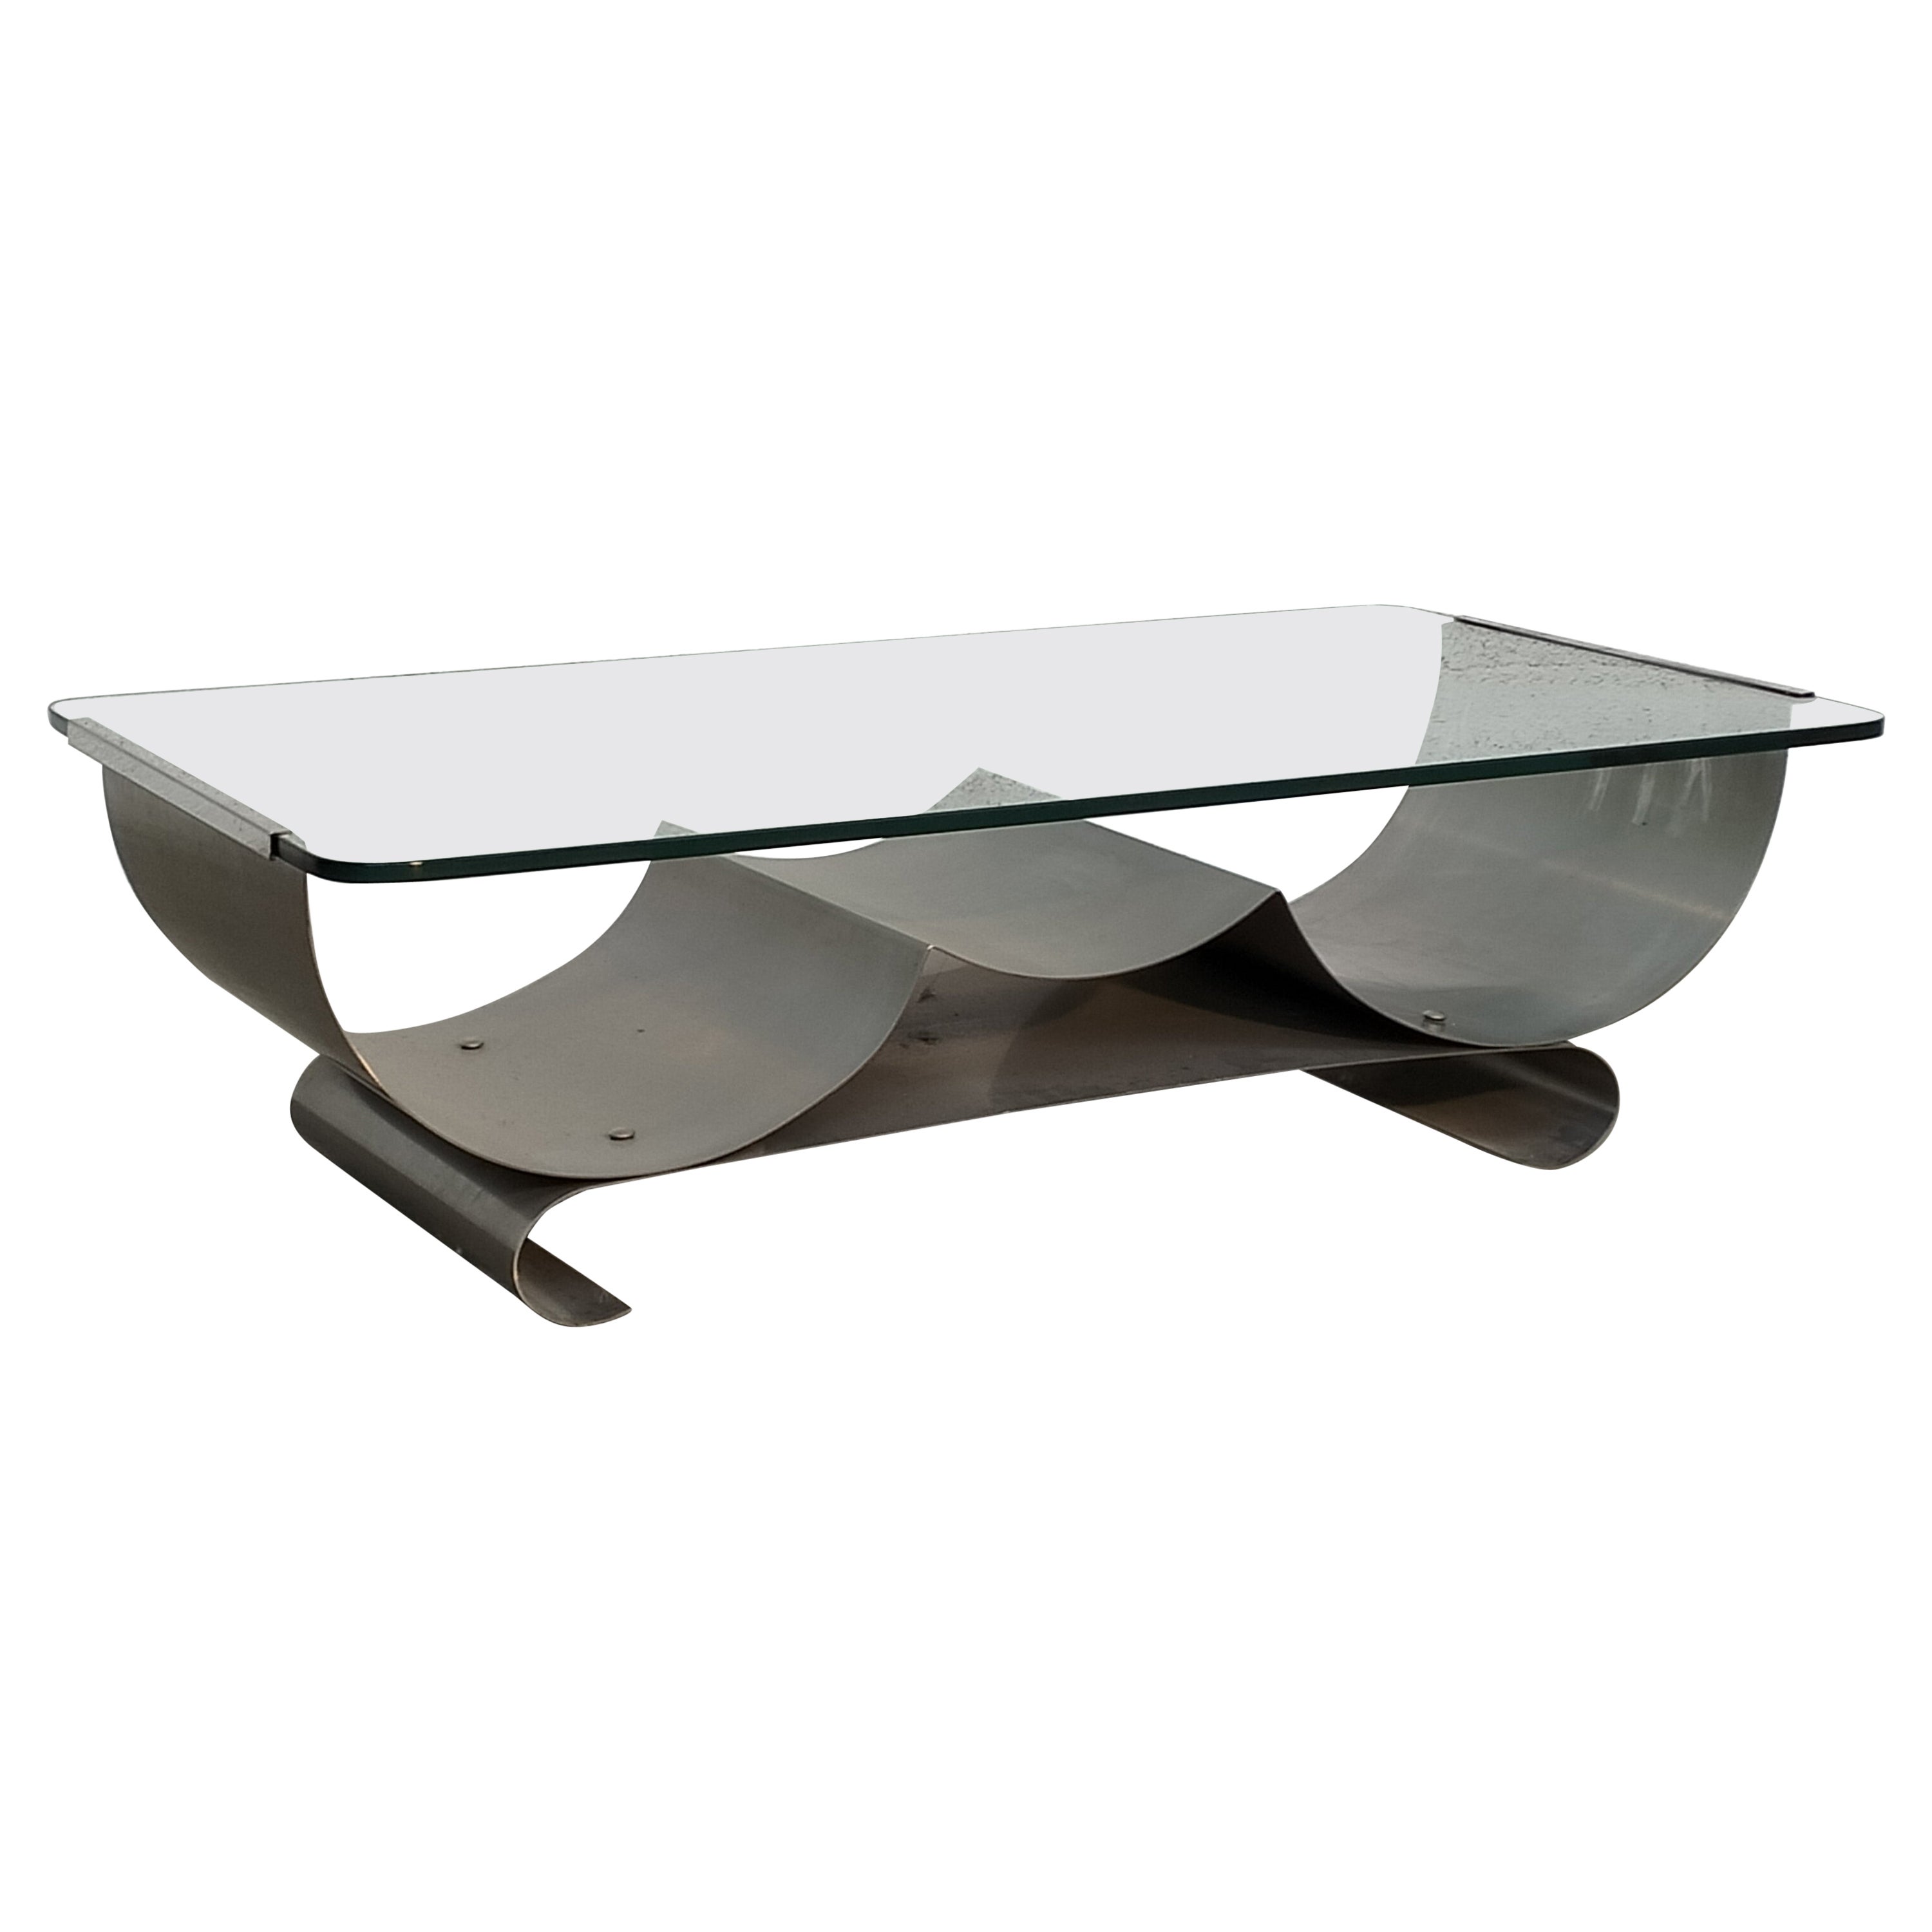 Stainless Steel and Glass Coffee Table by Francois Monnet for Kappa 70s For Sale